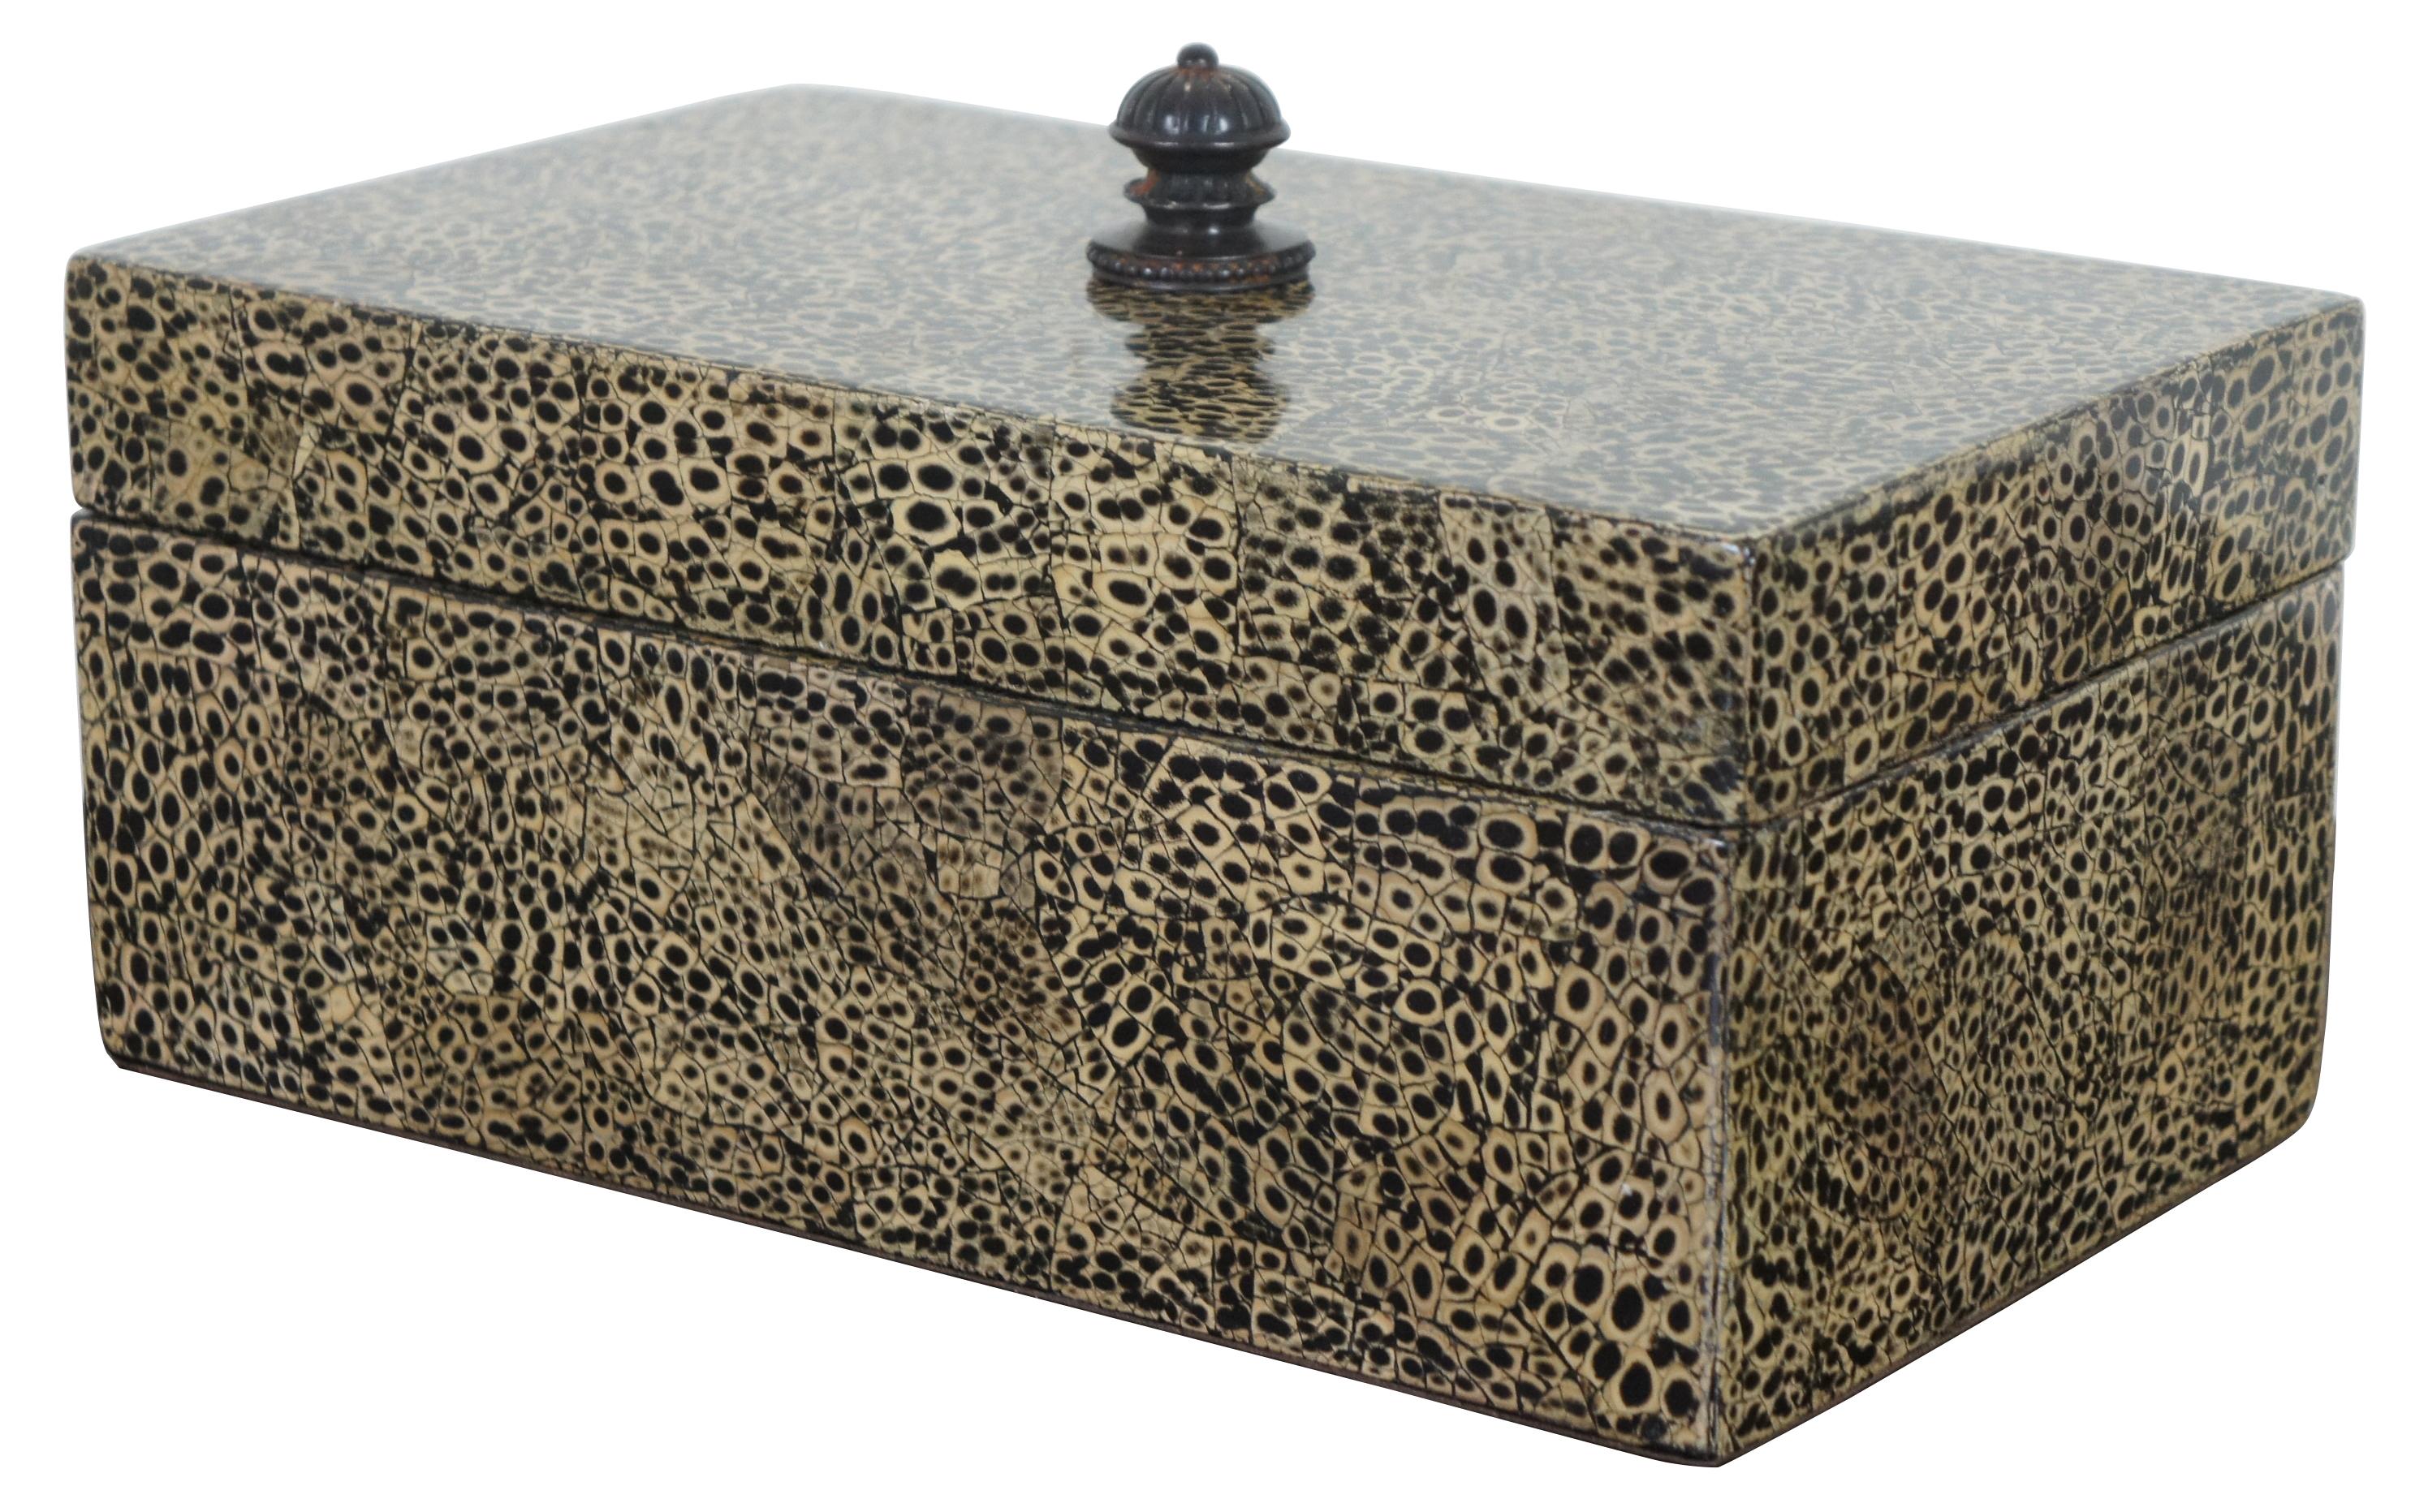 Beige and black faux shagreen snakeskin style trinket box with lacquered finish and black interior by Maitland-Smith. Measures: 12”.
  